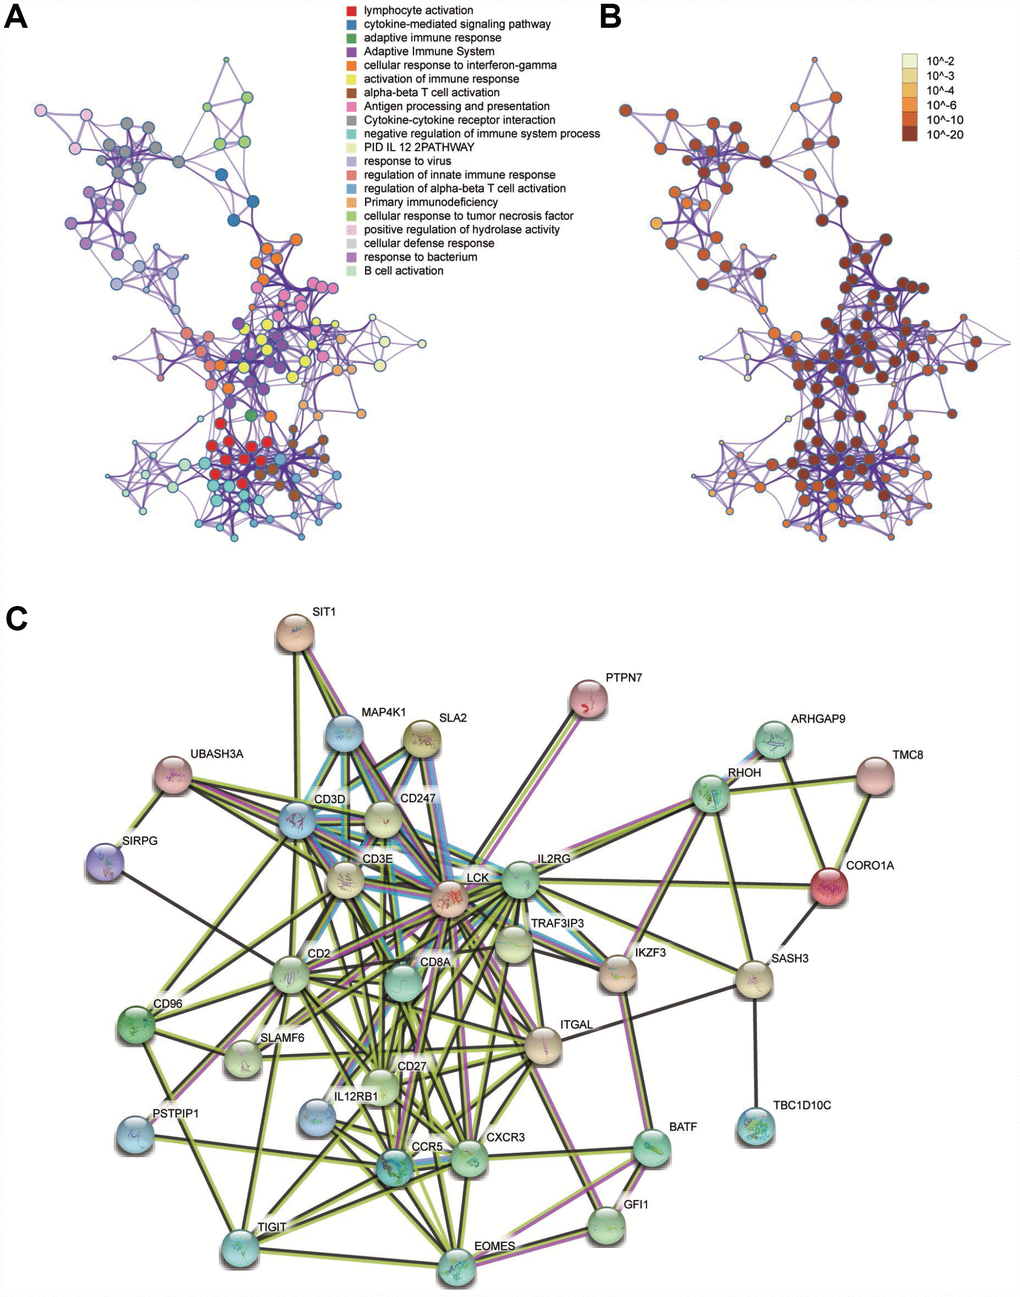 Functional enrichment analysis and construction of PPI network. (A) GO and pathway enrichment analysis of genes in the module 10. (B) P-value of each gene in the network. (C) PPI network constructed using STRING.